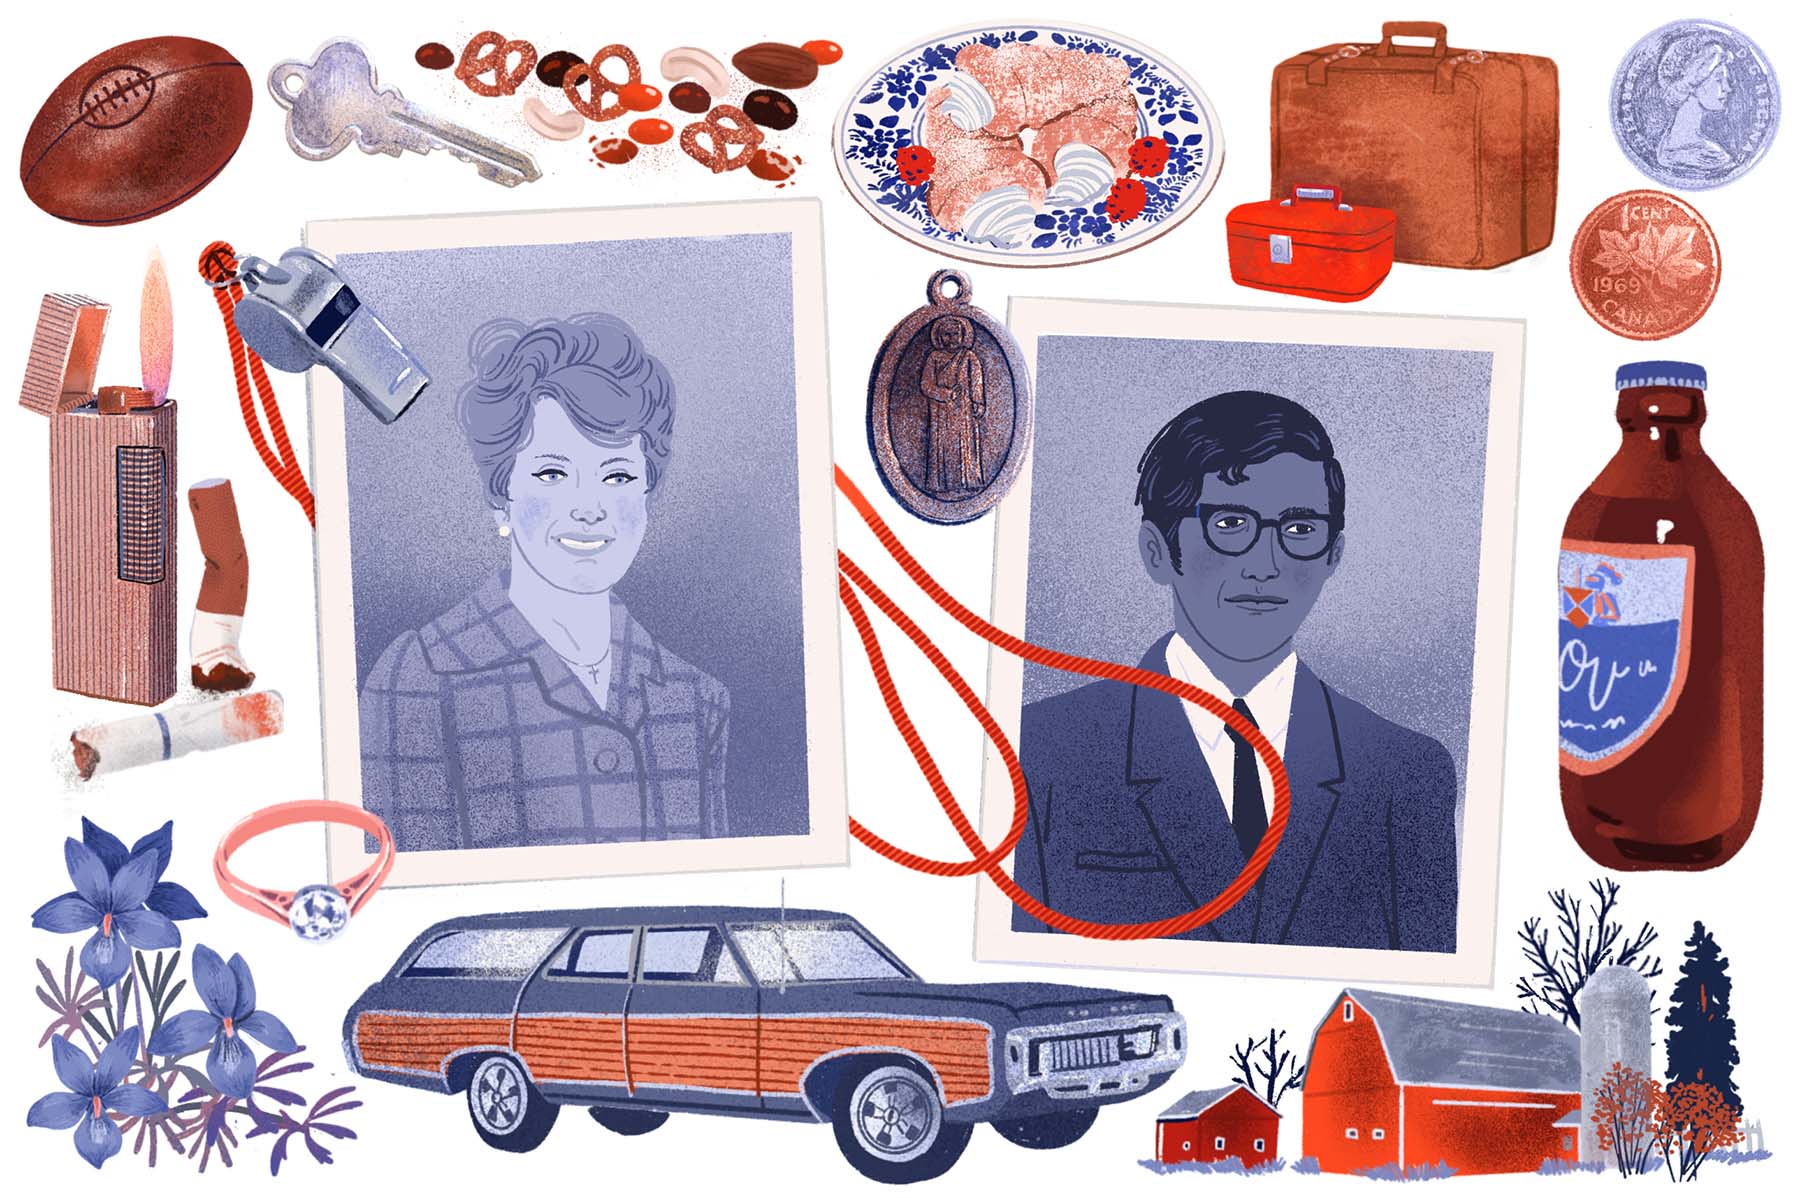 Illustrations of a stubbie of beer, station wagon, football, cigarettes, engagement ring, whistle, suitcases and flowers surround two separate photographs of a white woman and a Sri Lankan man